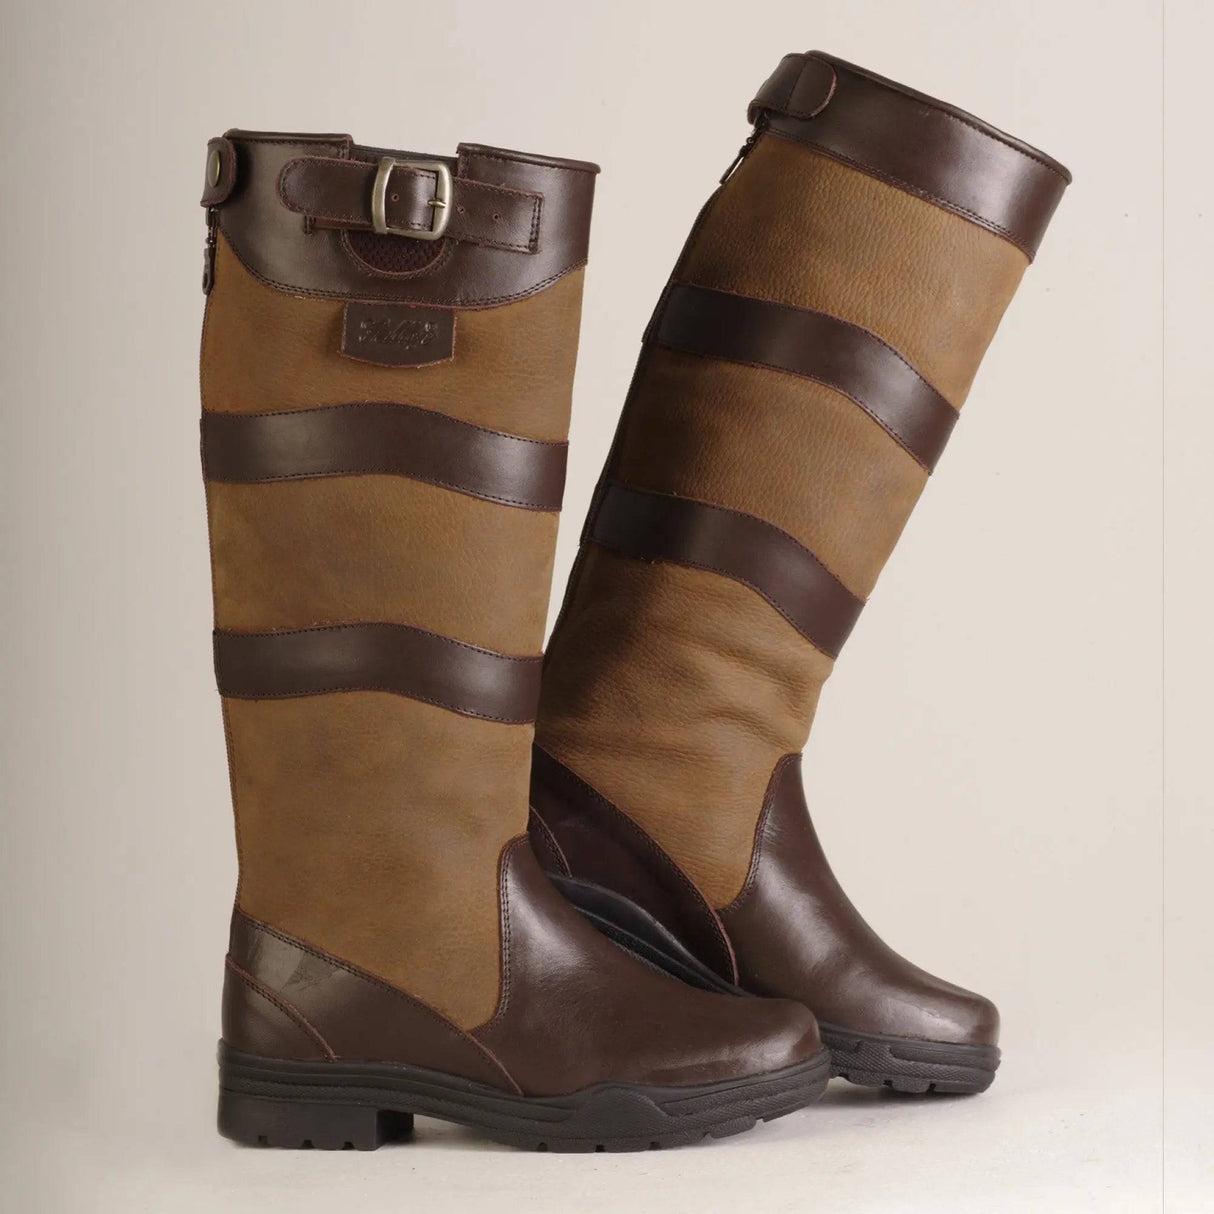 Gallop Chiltern Country Boot  Country Boots Barnstaple Equestrian Supplies